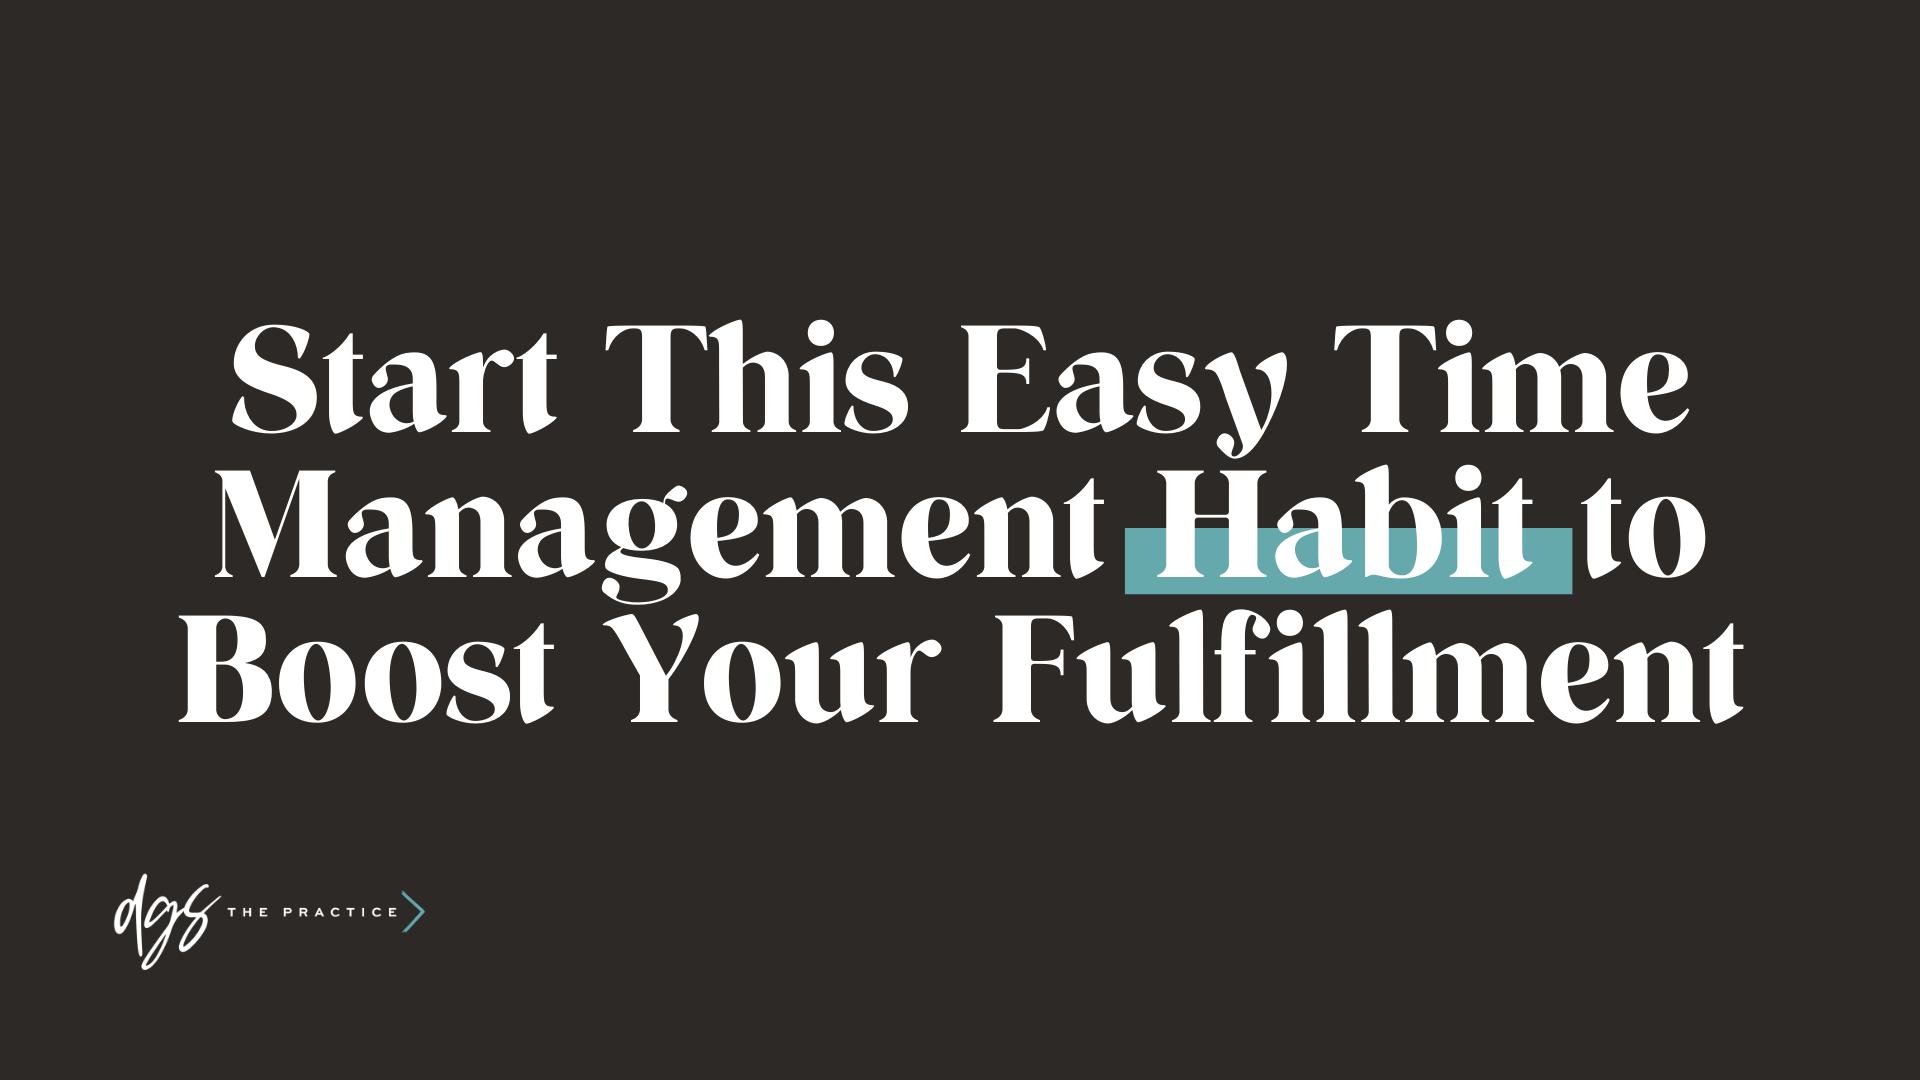 Boost fulfillment with this habit